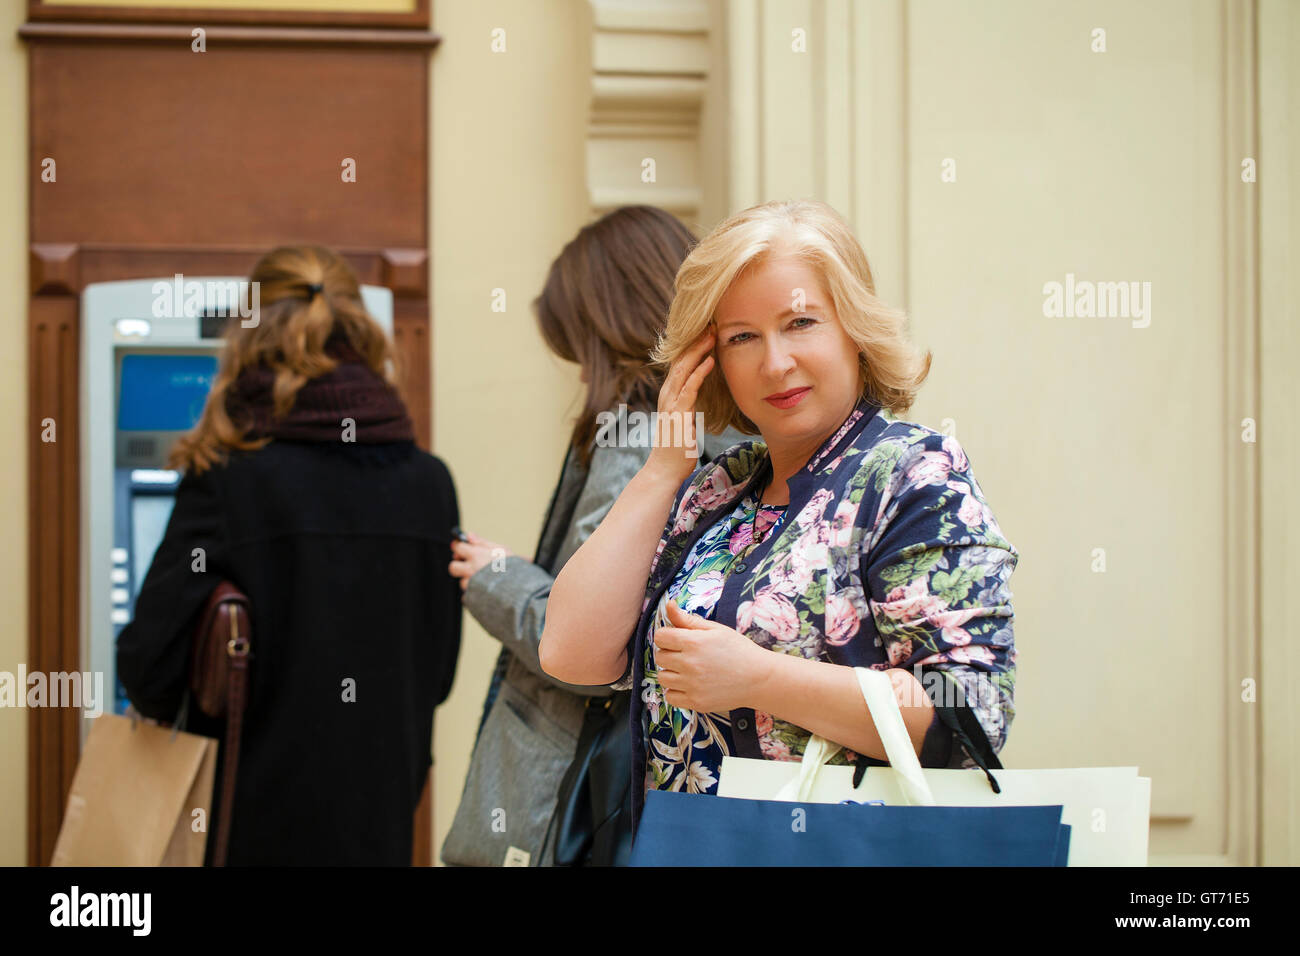 Mature blonde woman with credit card in hand near automated teller machine in shop Stock Photo